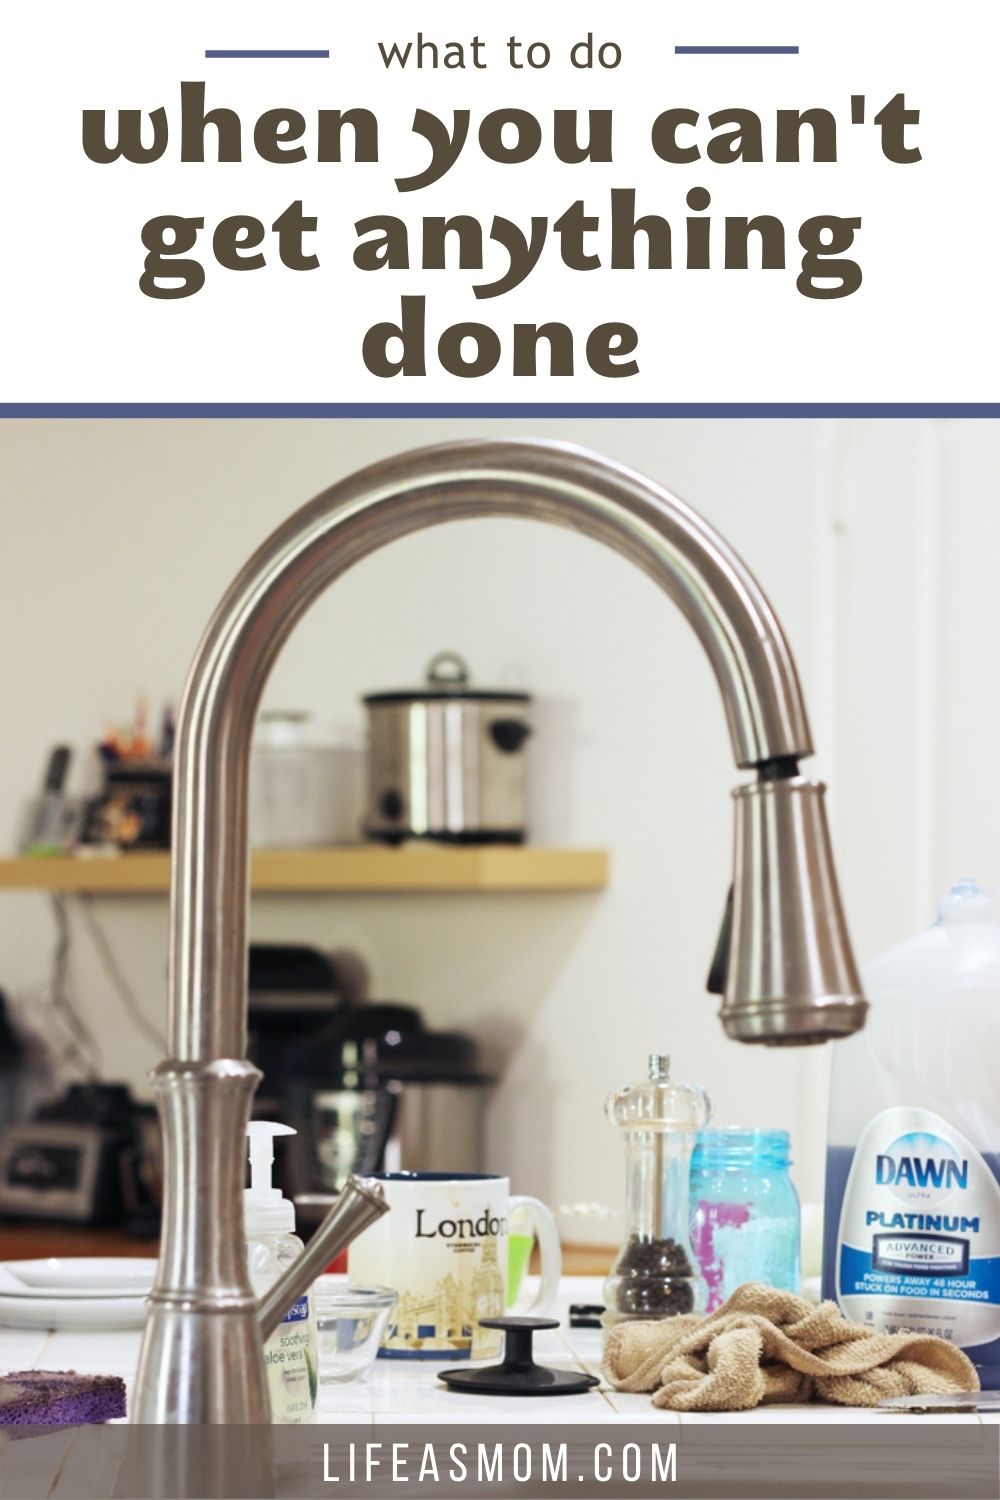 image of cluttered kitchen counter and sink with text overlay.